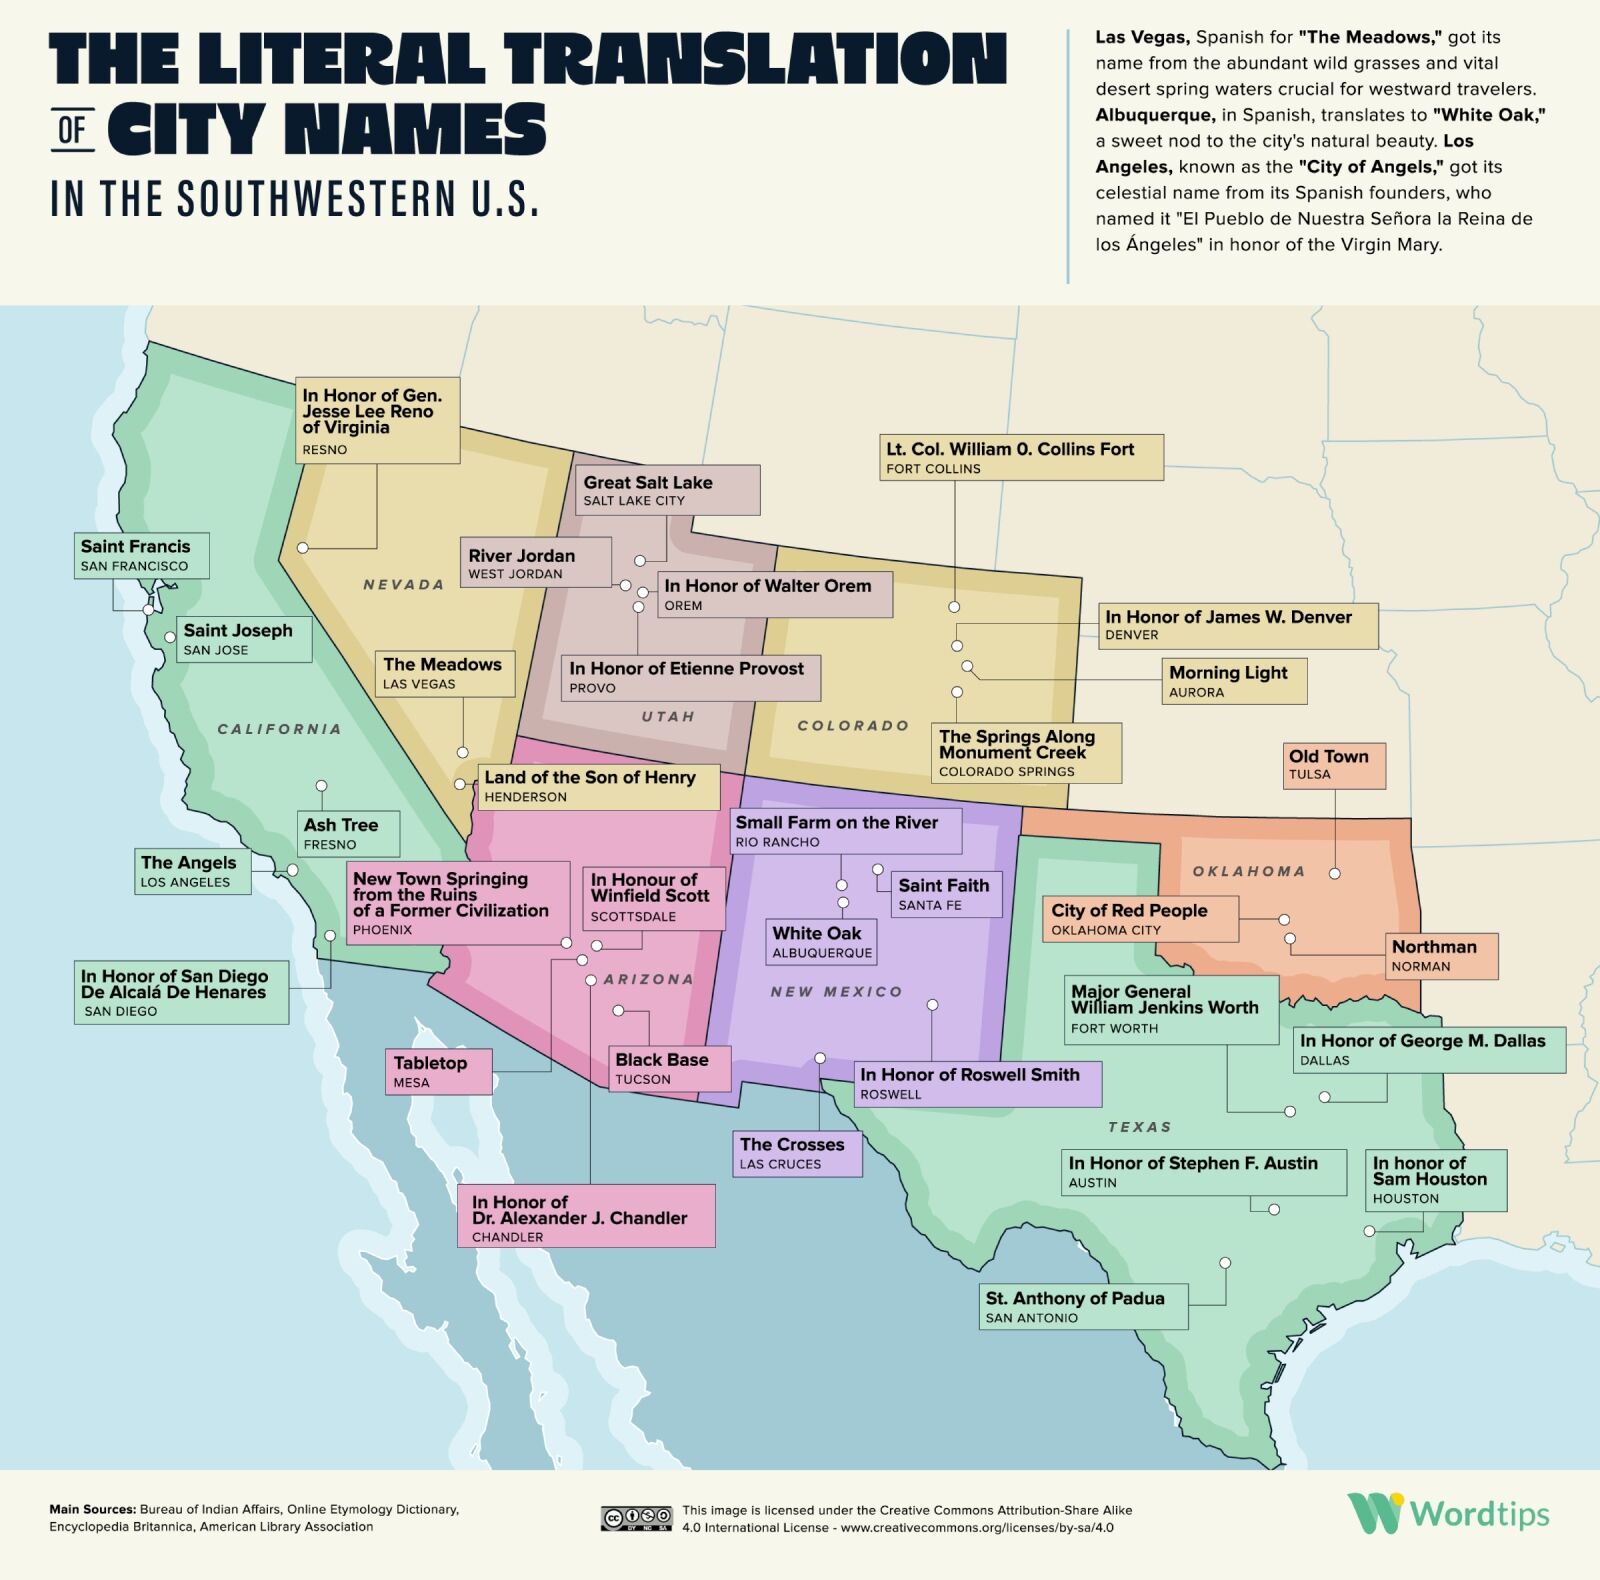 infographic of literal translation of southwest city names